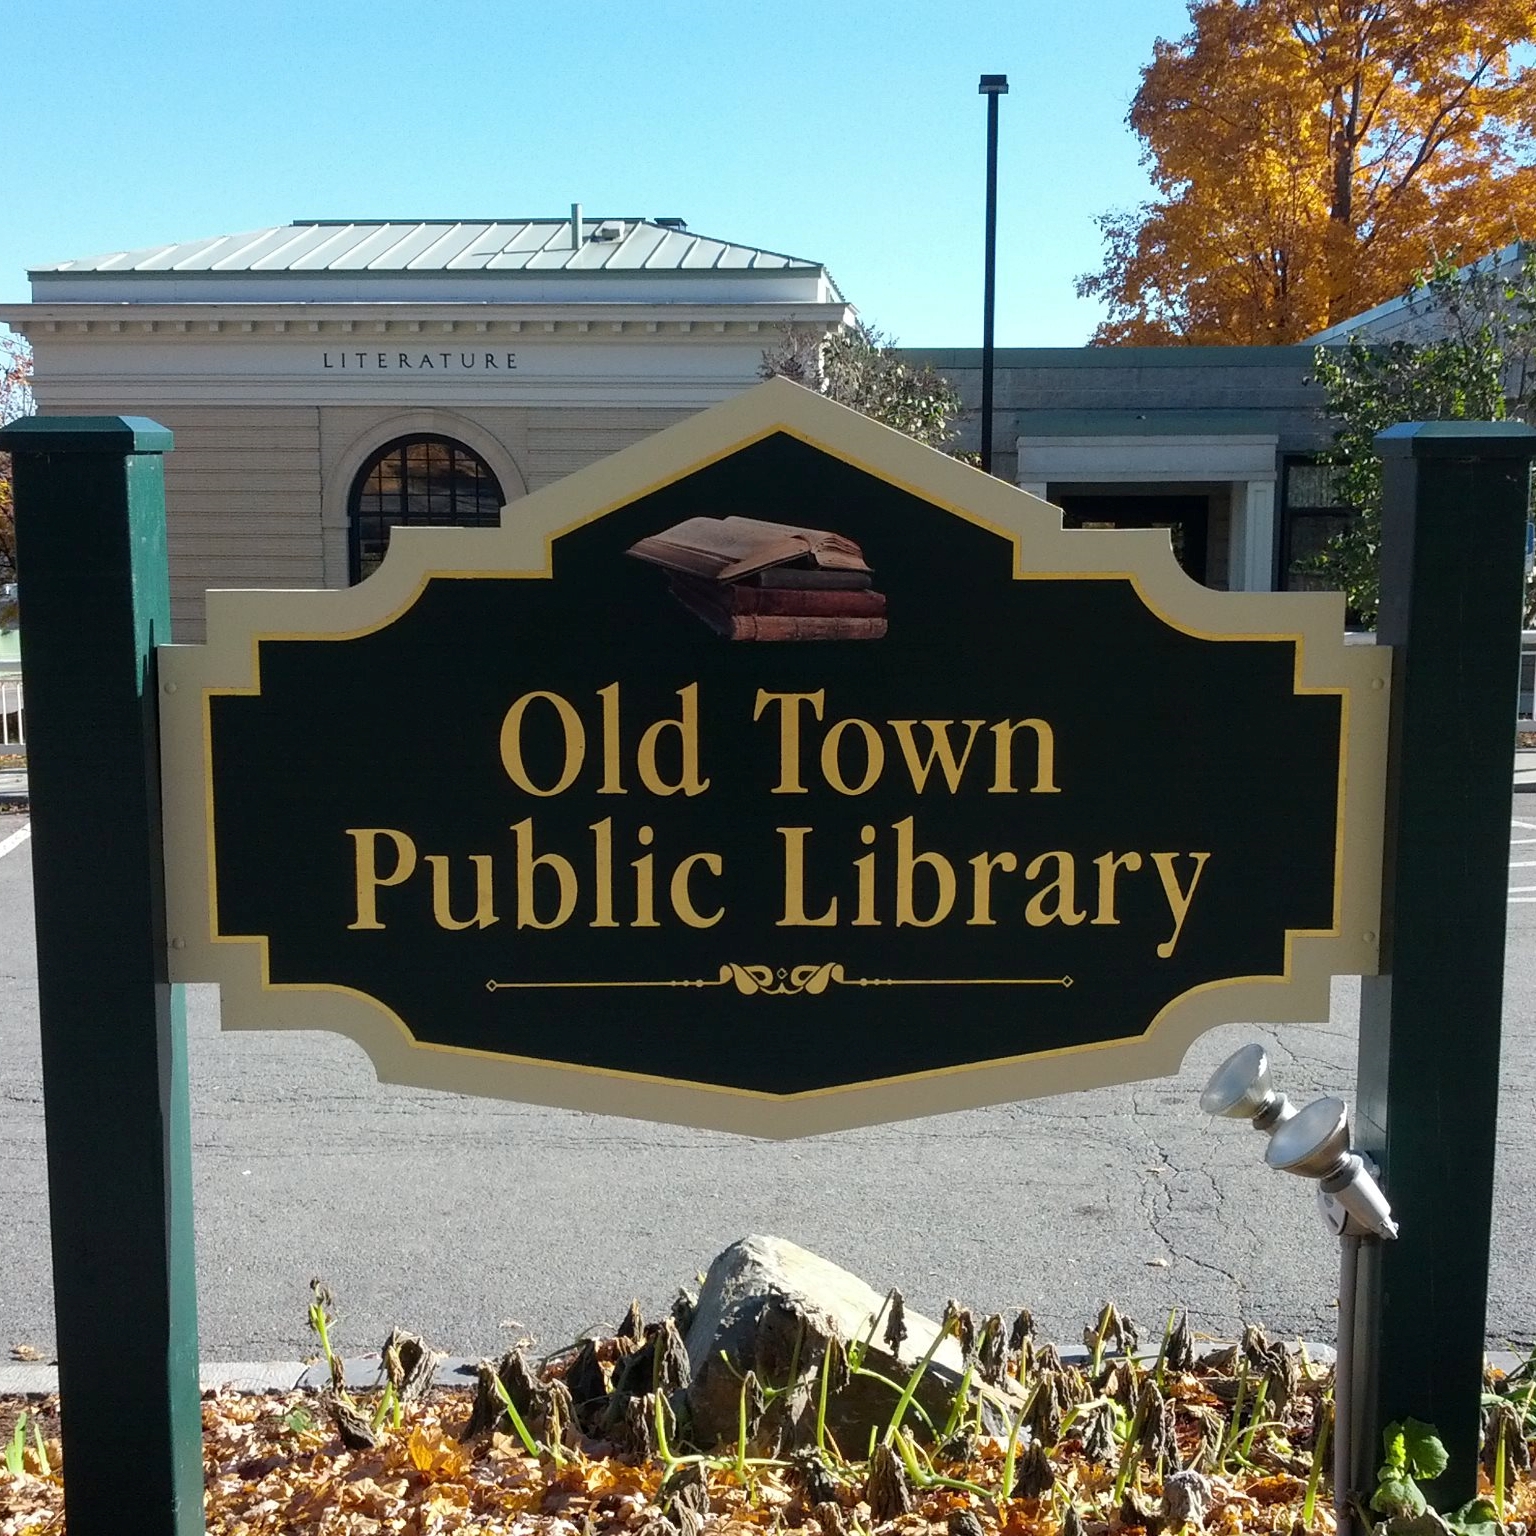 Old Town Public Library in Maine